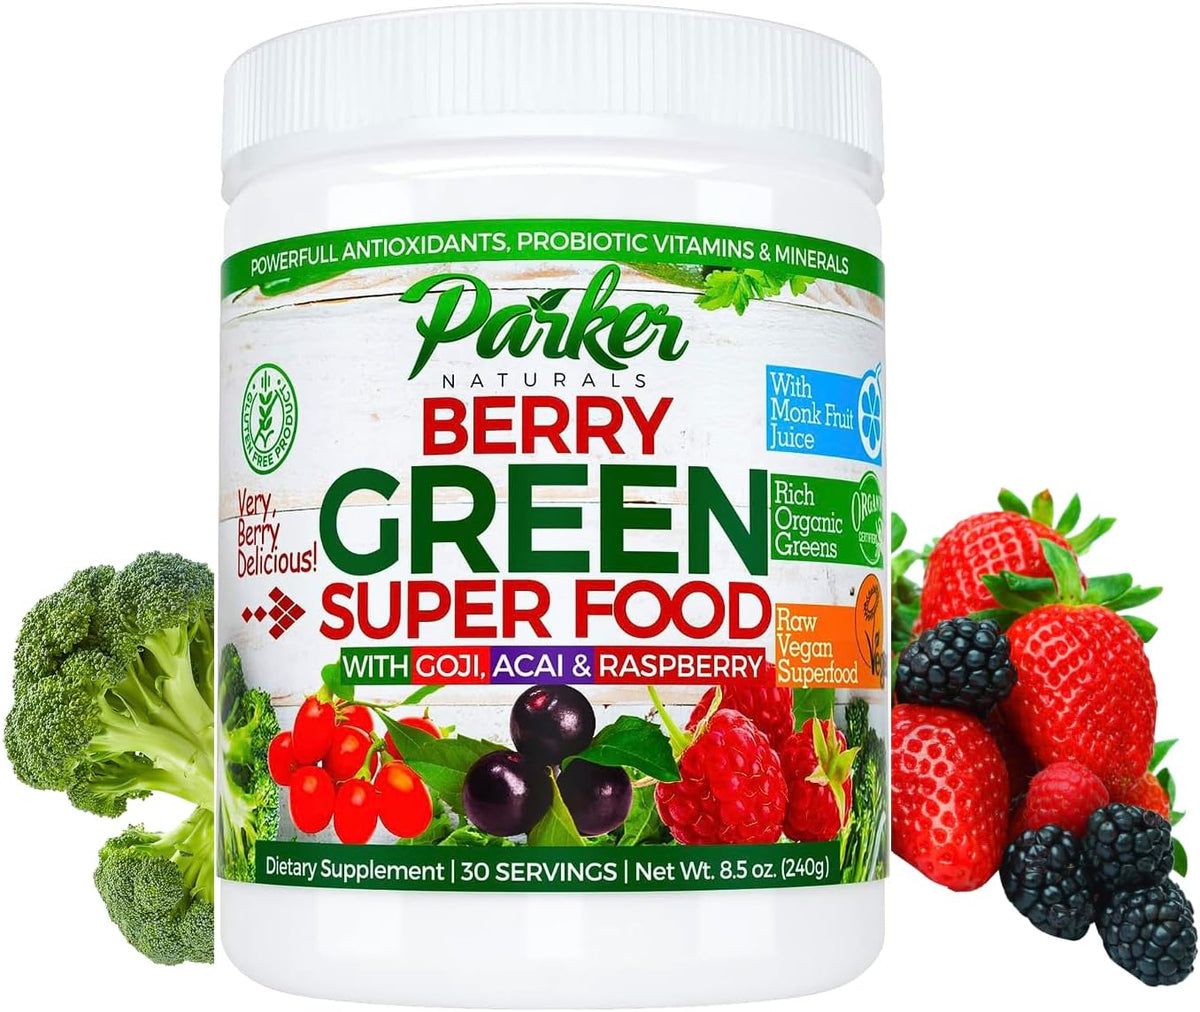 Superfood Smoothie Mix (Organic) - 3 Flavors